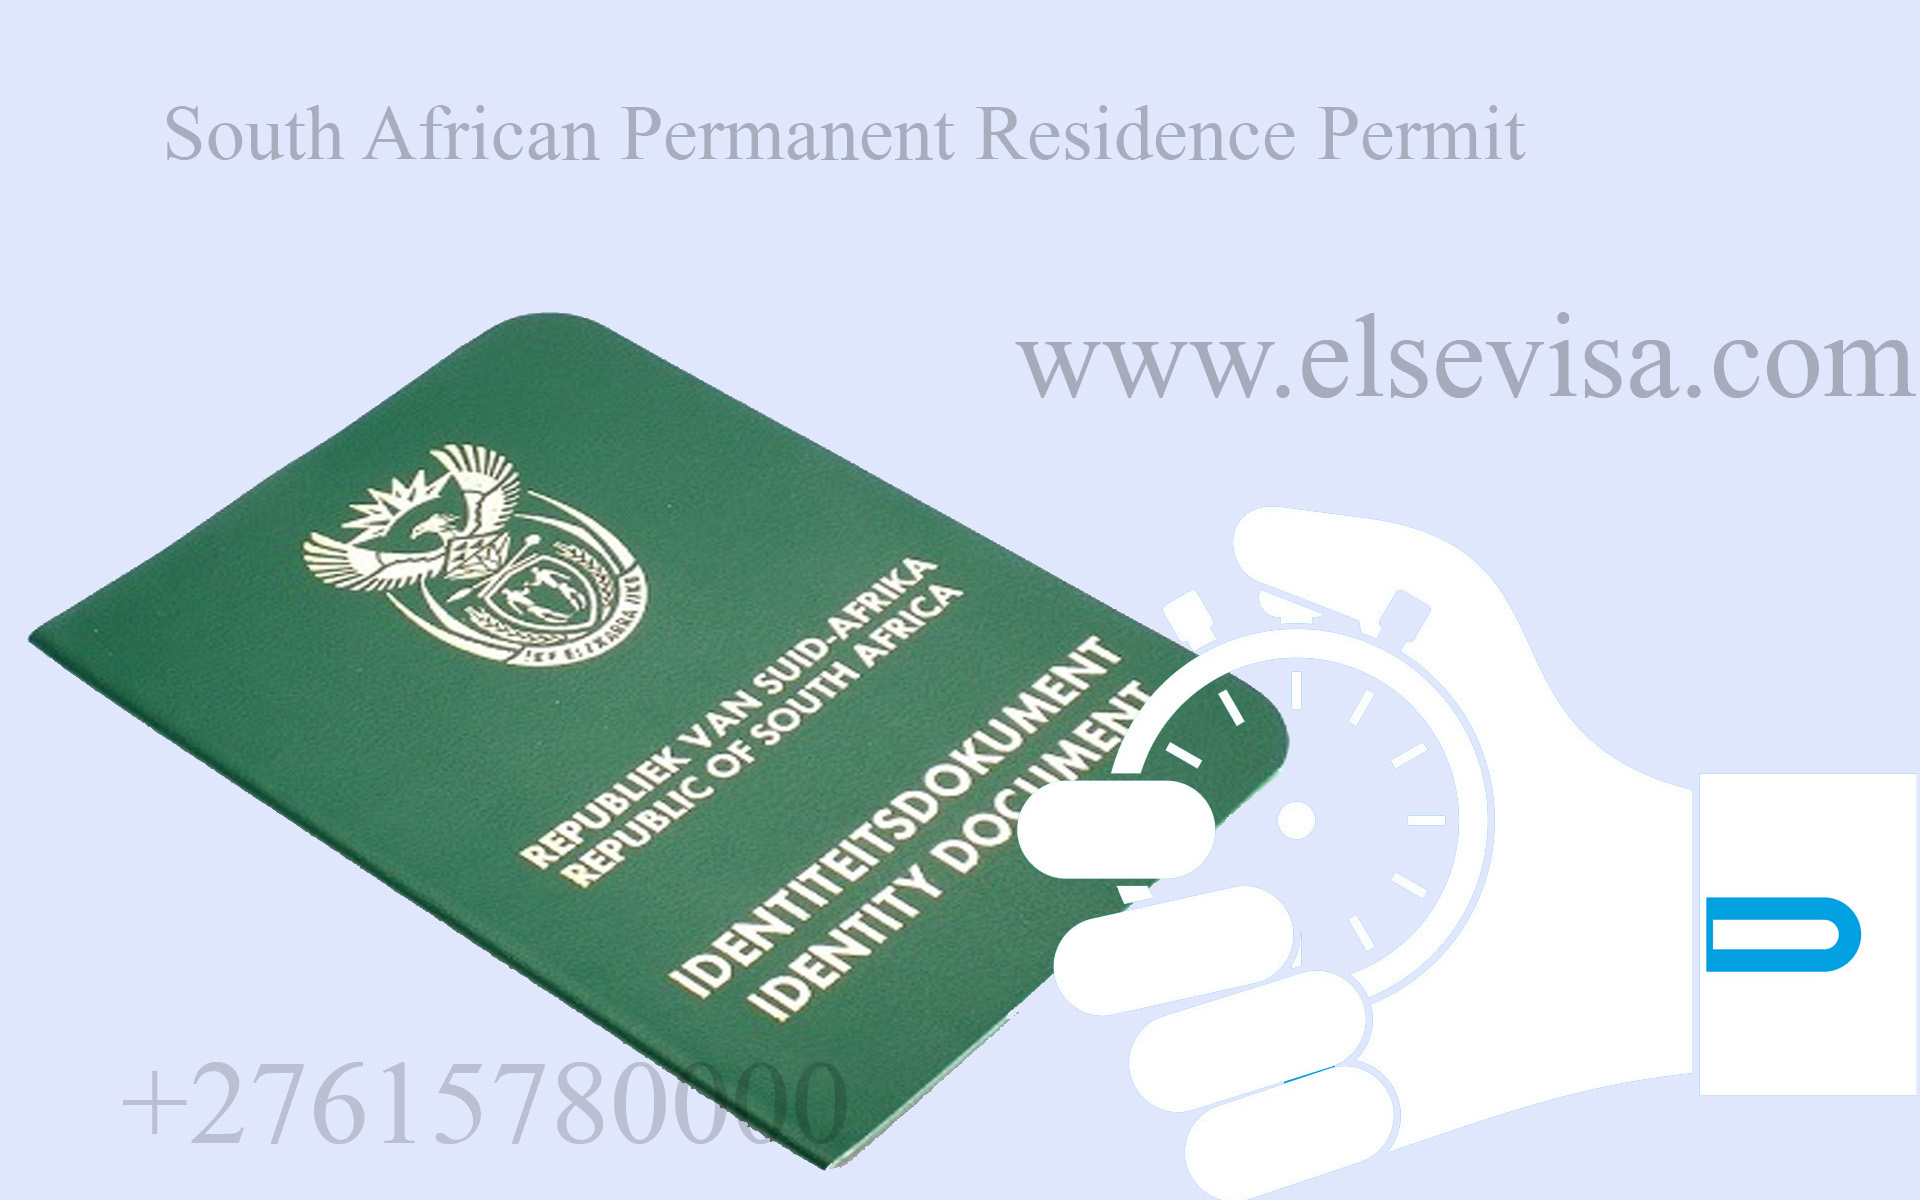 South African Permanent Residence Permit Rules And Guidelines